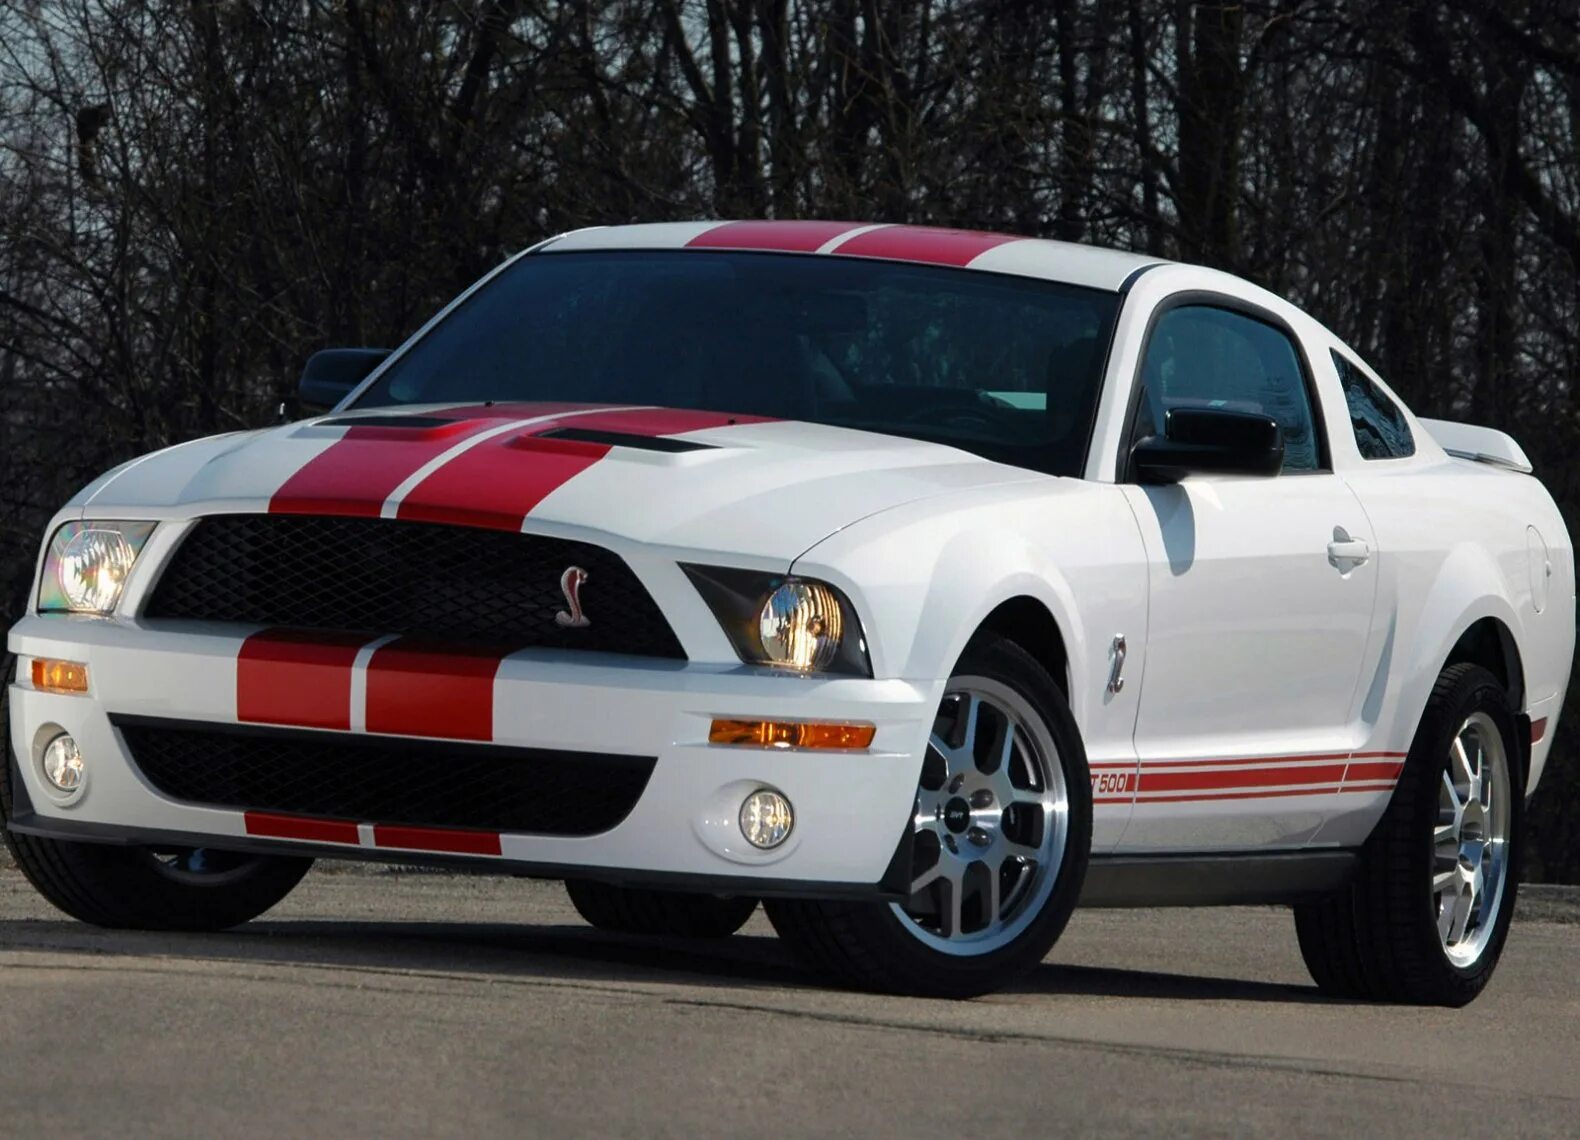 Форд Мустанг gt 500. Форд Шелби ГТ 500. Форд Мустанг Шелби gt 500. Ford Mustang Shelby gt500 2007. Mustang shelby gt